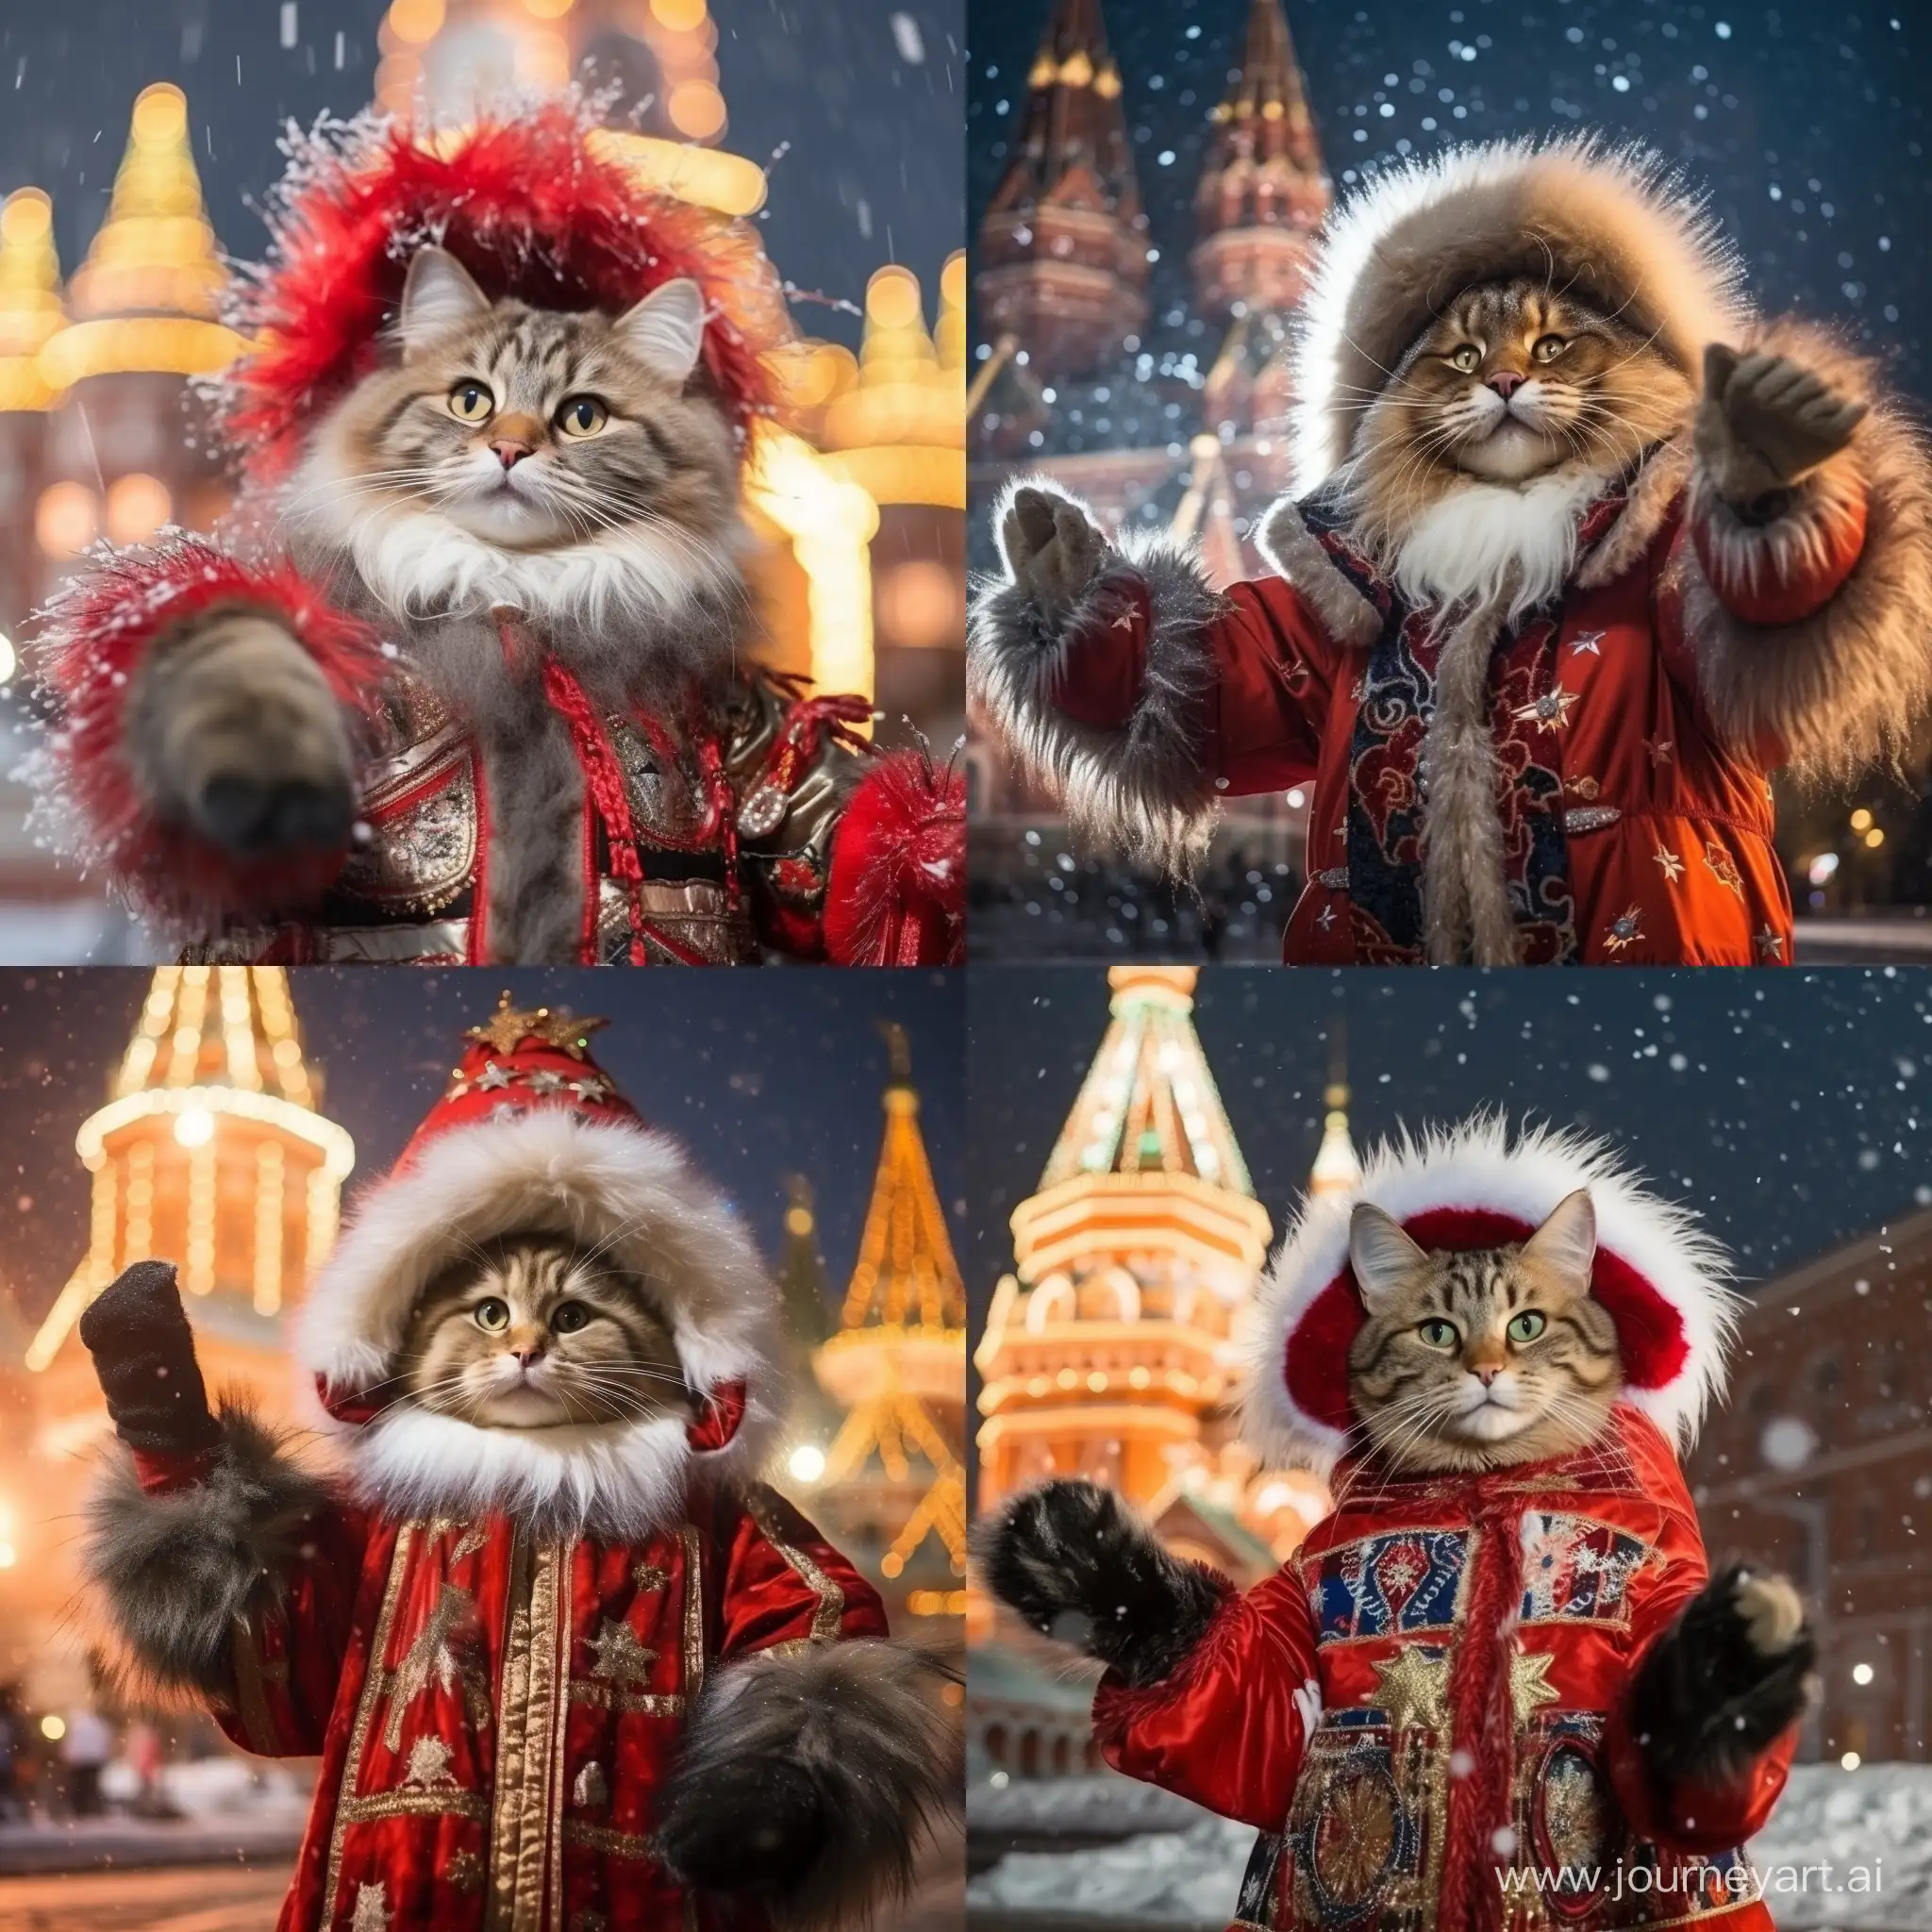 Celebrating-New-Year-CatMan-in-Ded-Moroz-Costume-Amid-Red-Square-Festivities